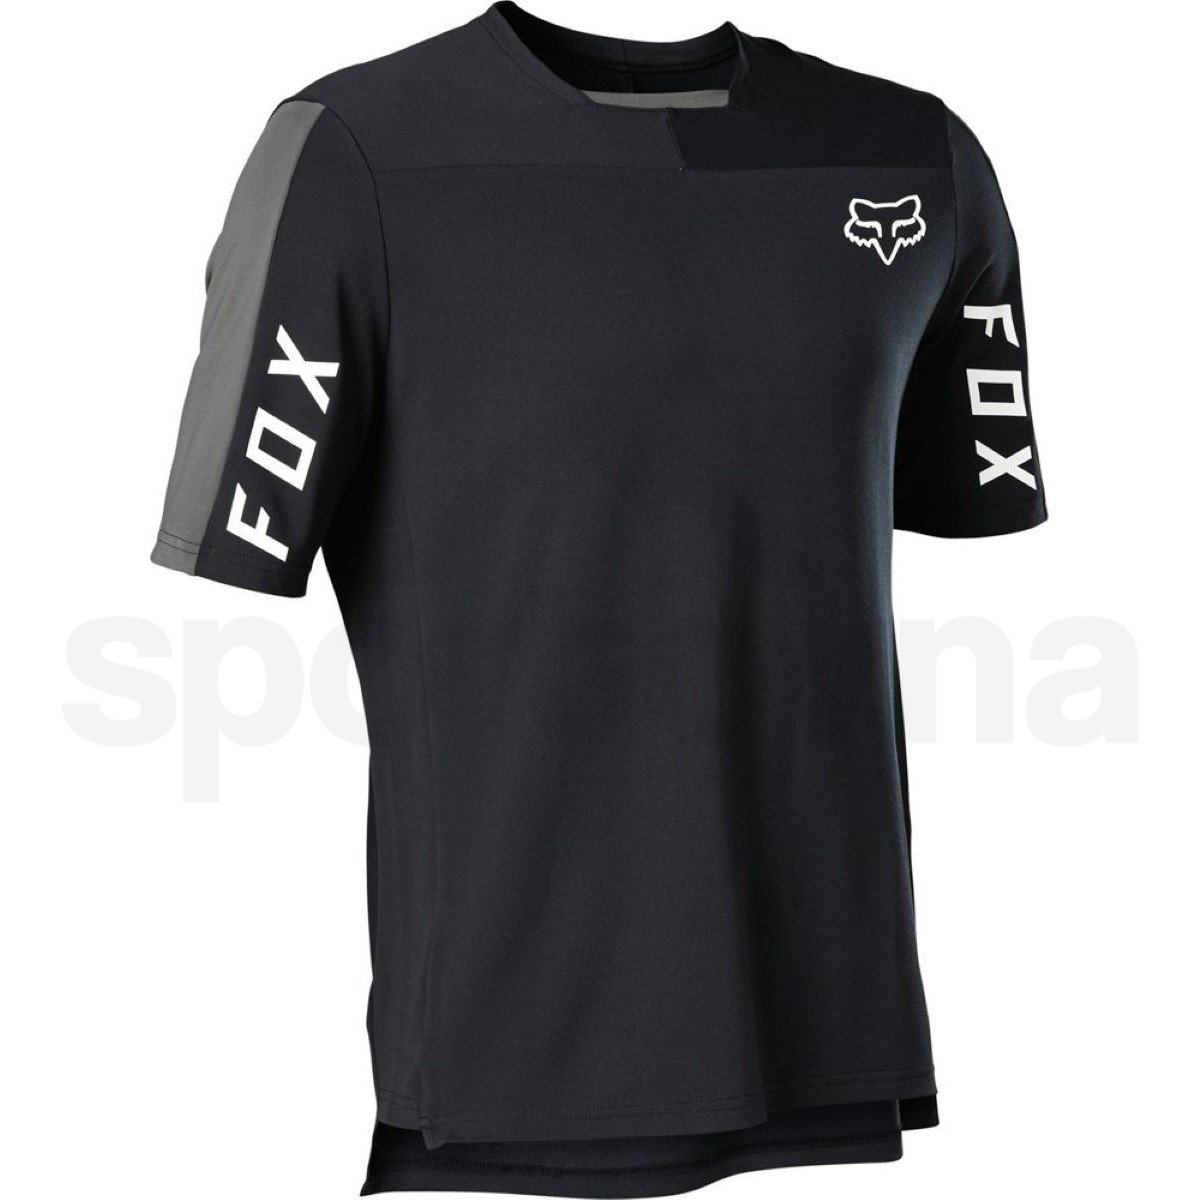 defend-pro-ss-jersey (2)